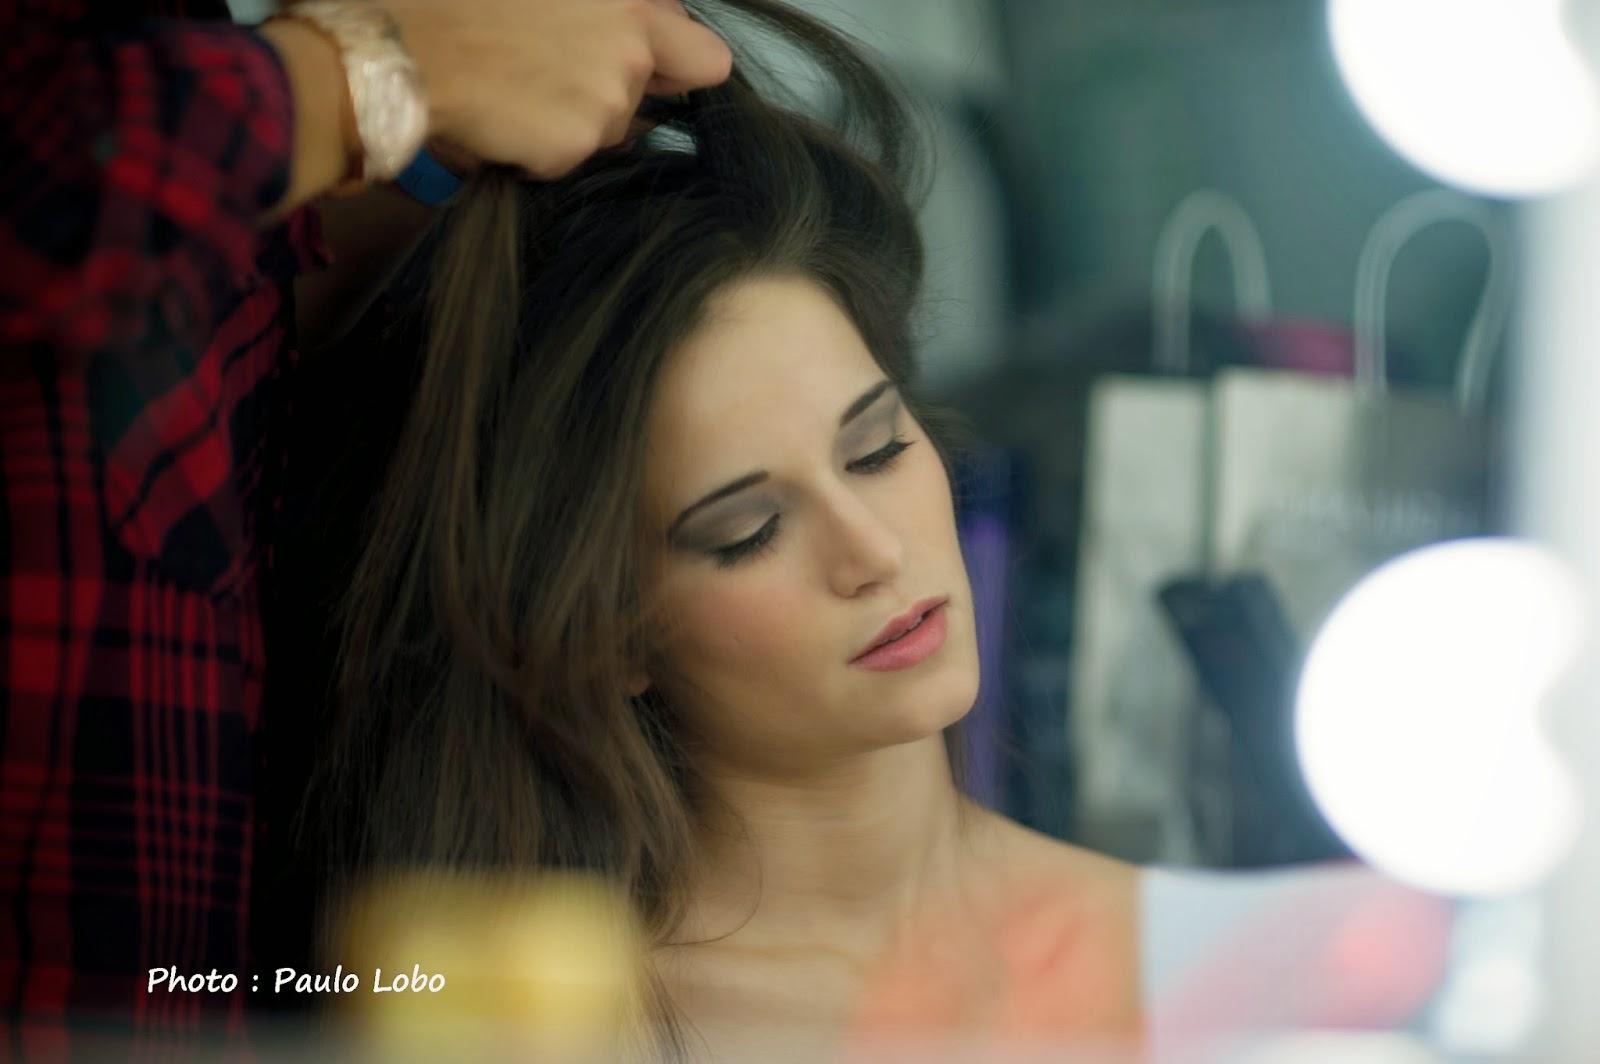 Backstage dreams - Miss Portugal au Luxembourg 2015